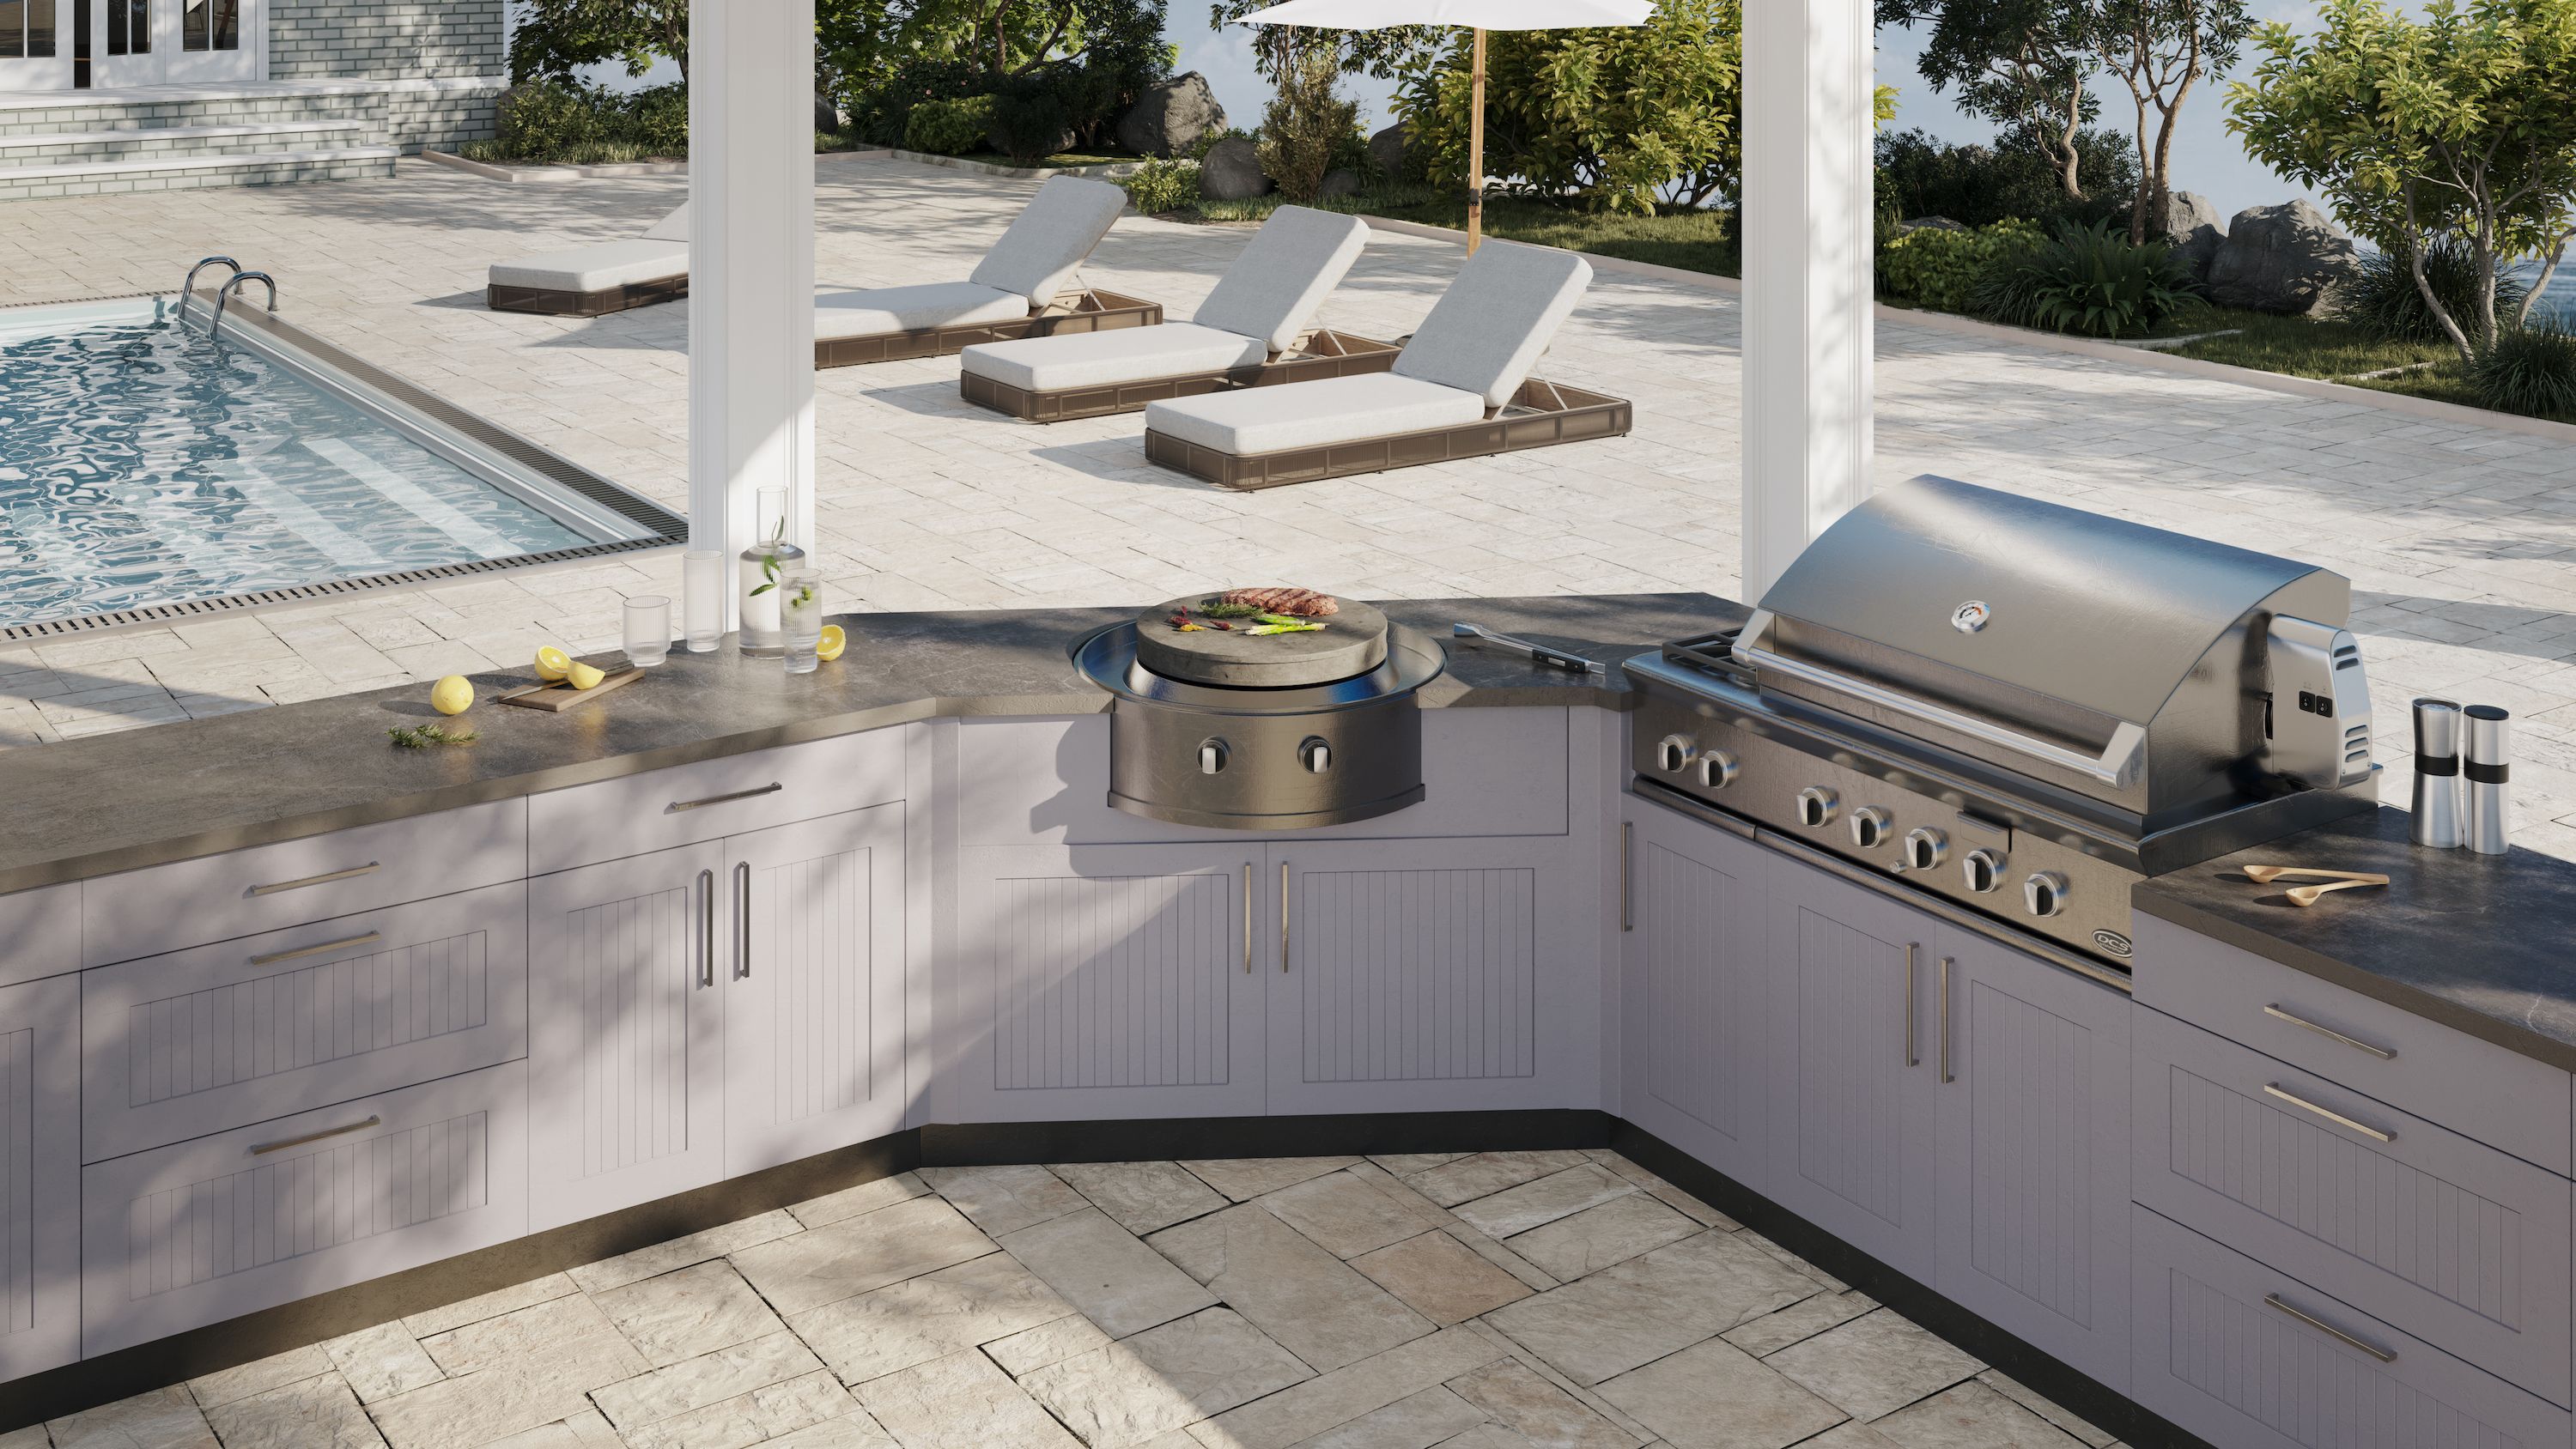 4 Things to Consider When Designing an Outdoor Kitchen